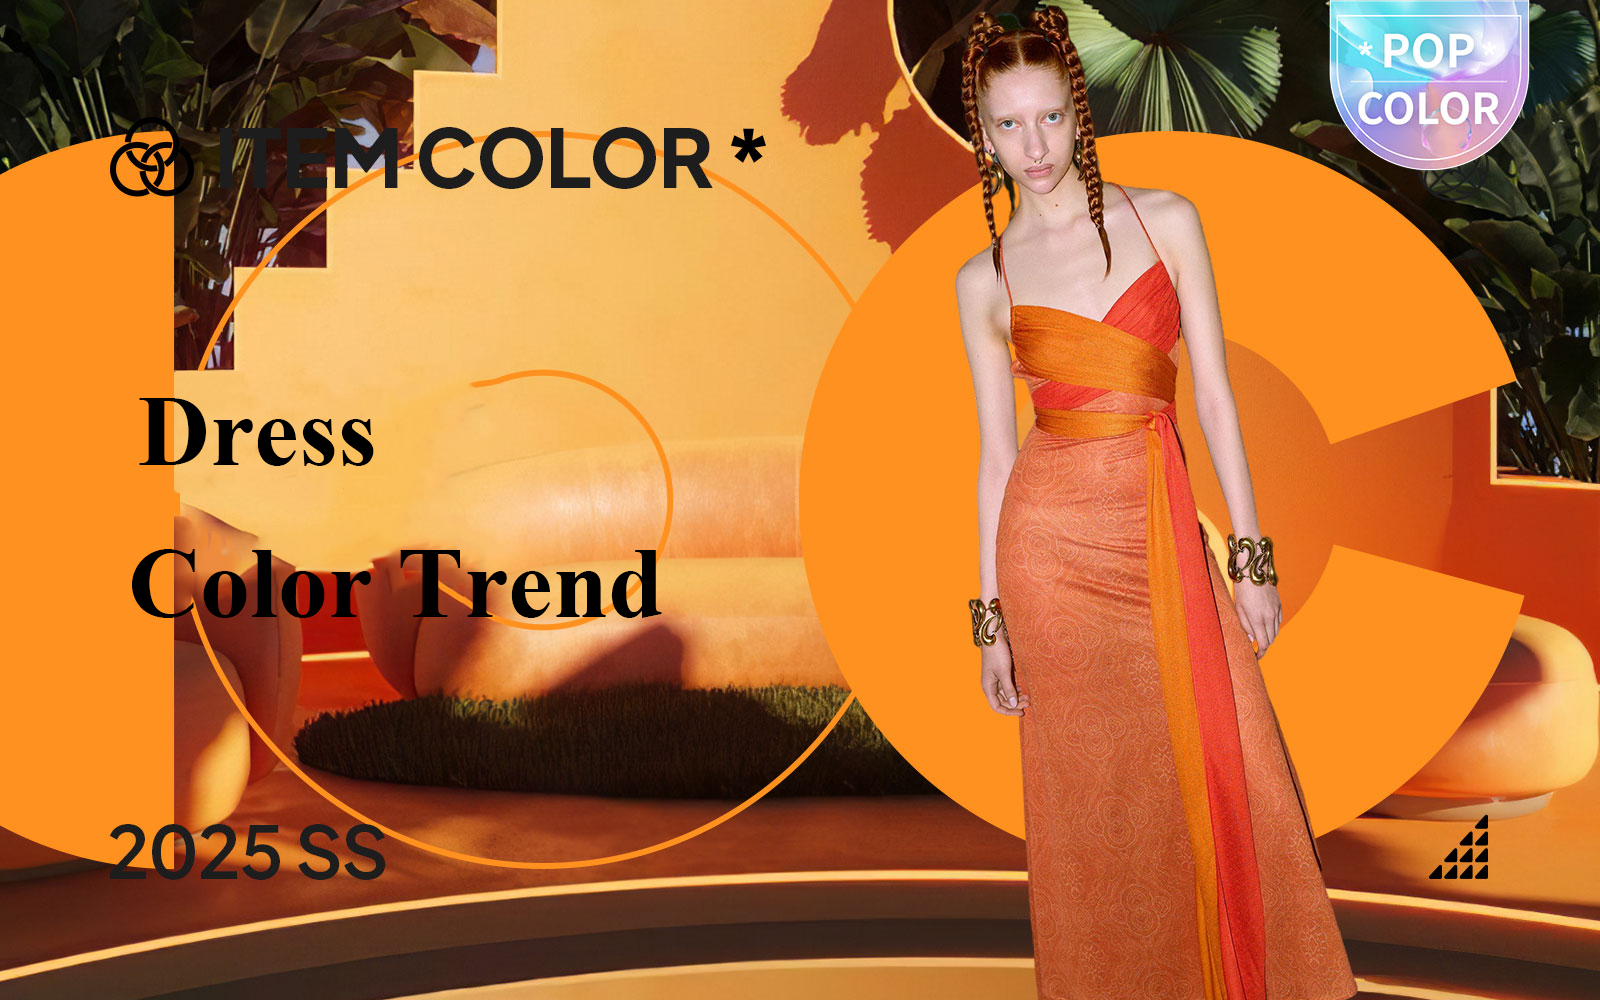 Dazzling Colors -- The Color Trend for Women's Dress